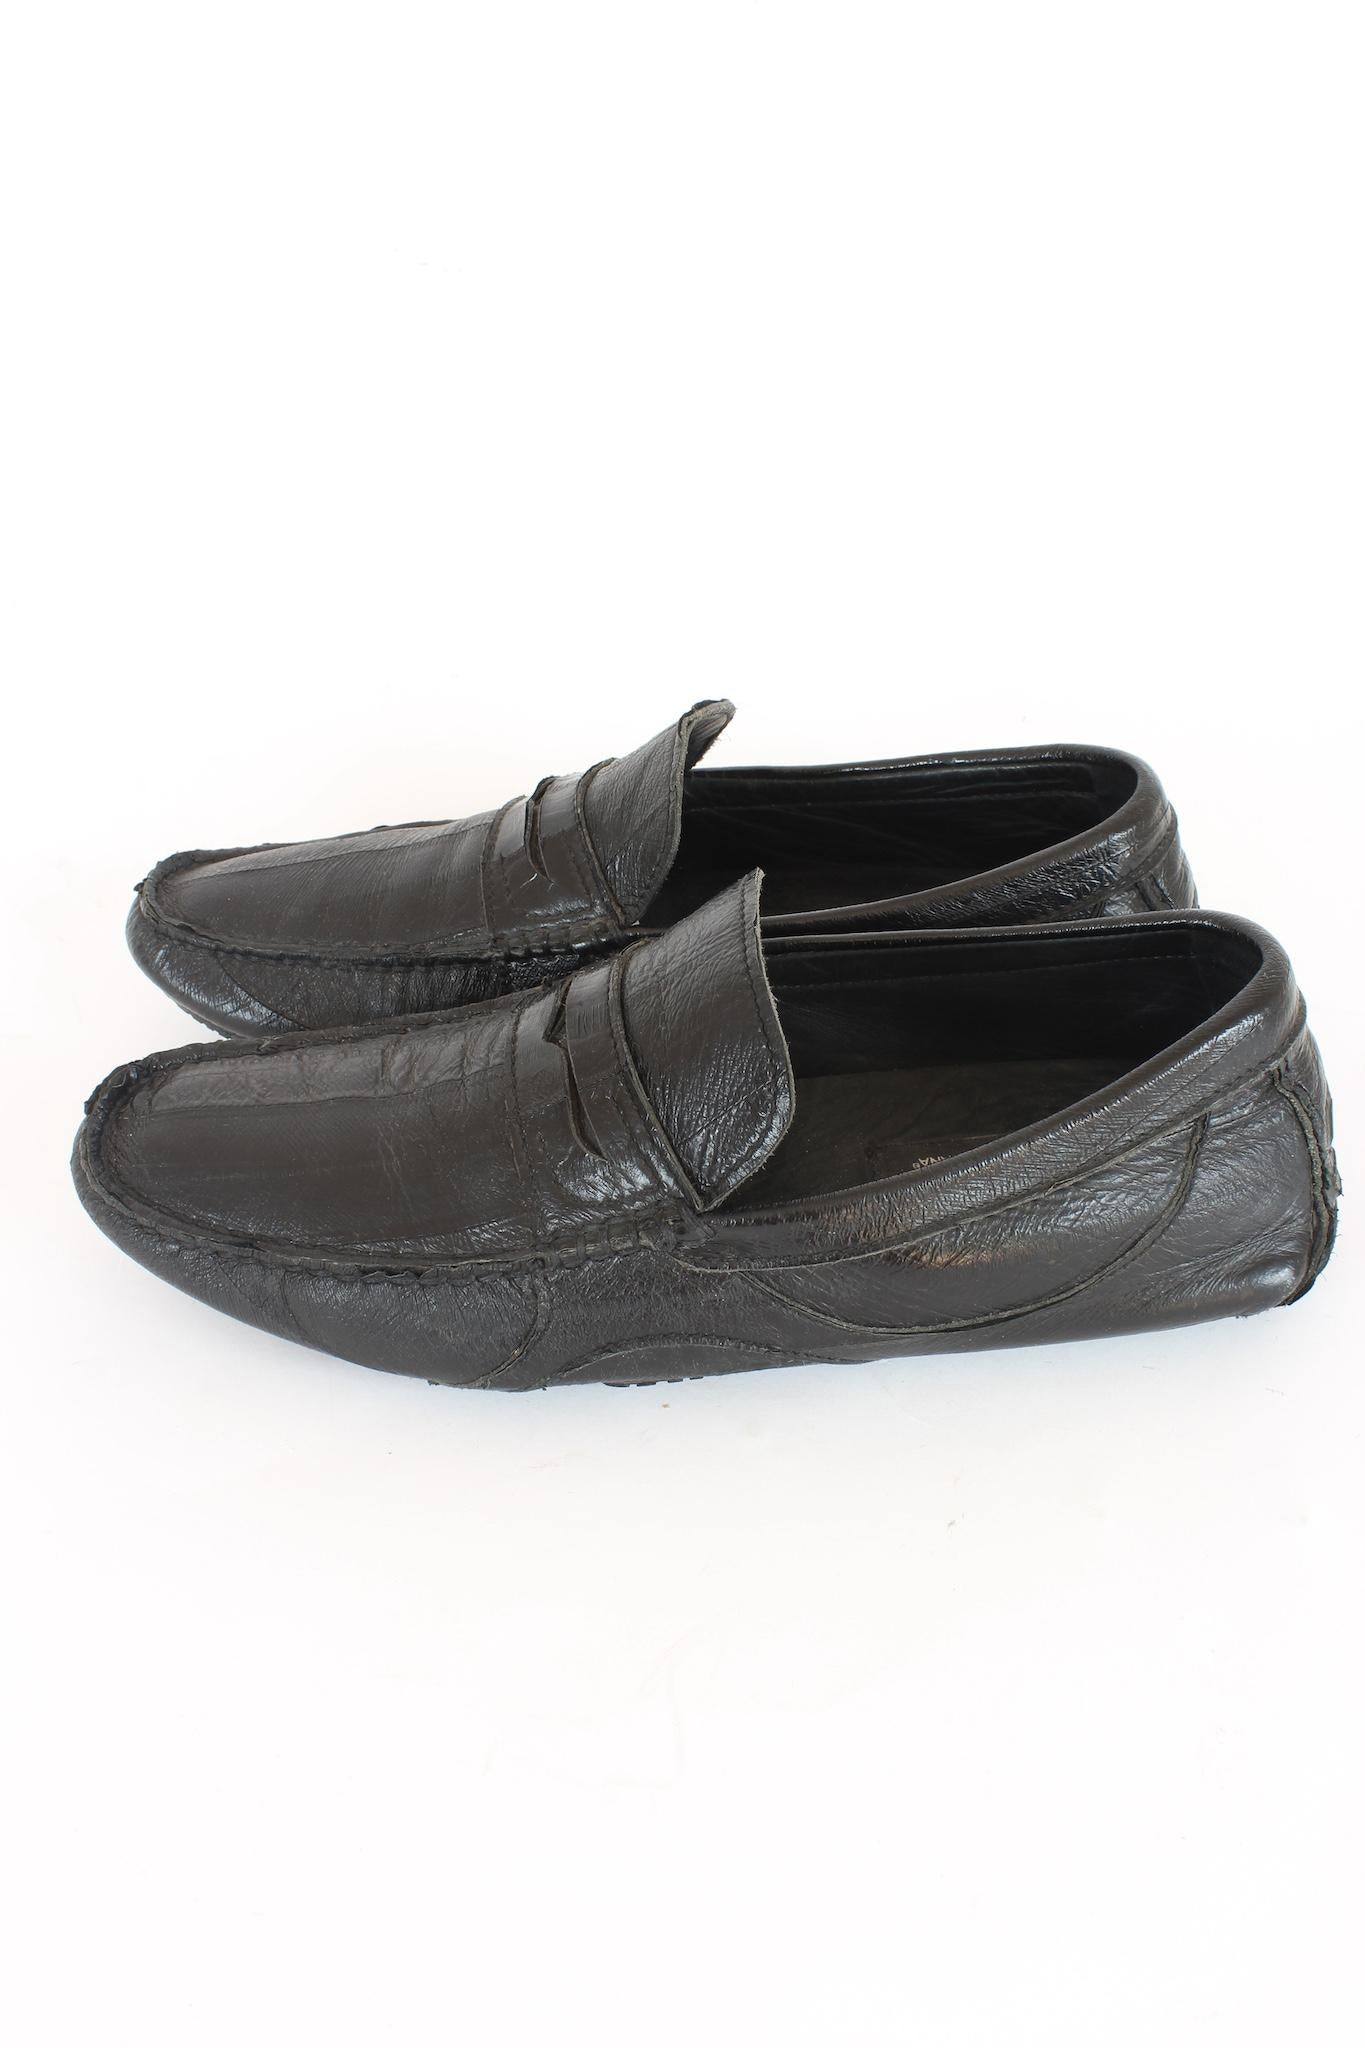 Dolce & Gabbana Black Leather Mocassins Shoes 2000s In Excellent Condition For Sale In Brindisi, Bt